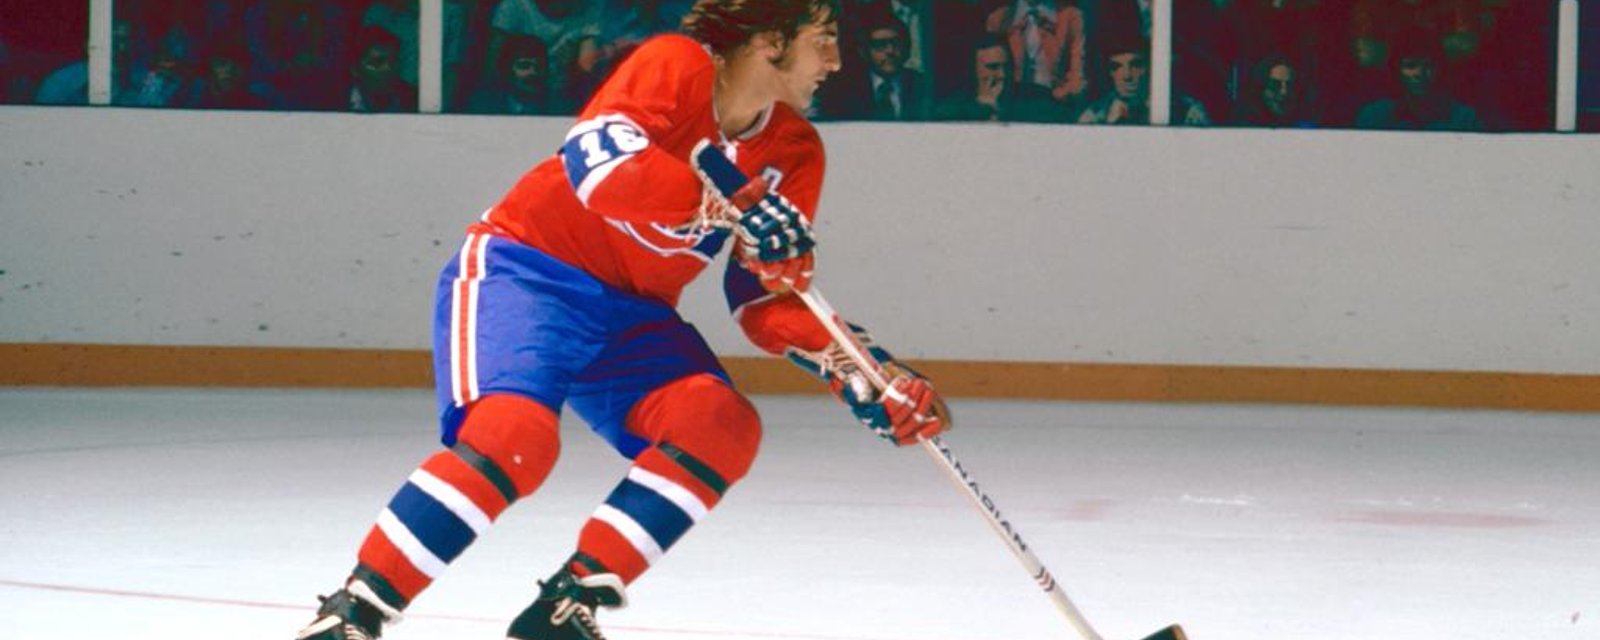 Habs legend Serge Savard appears to feel betrayed by the organization.